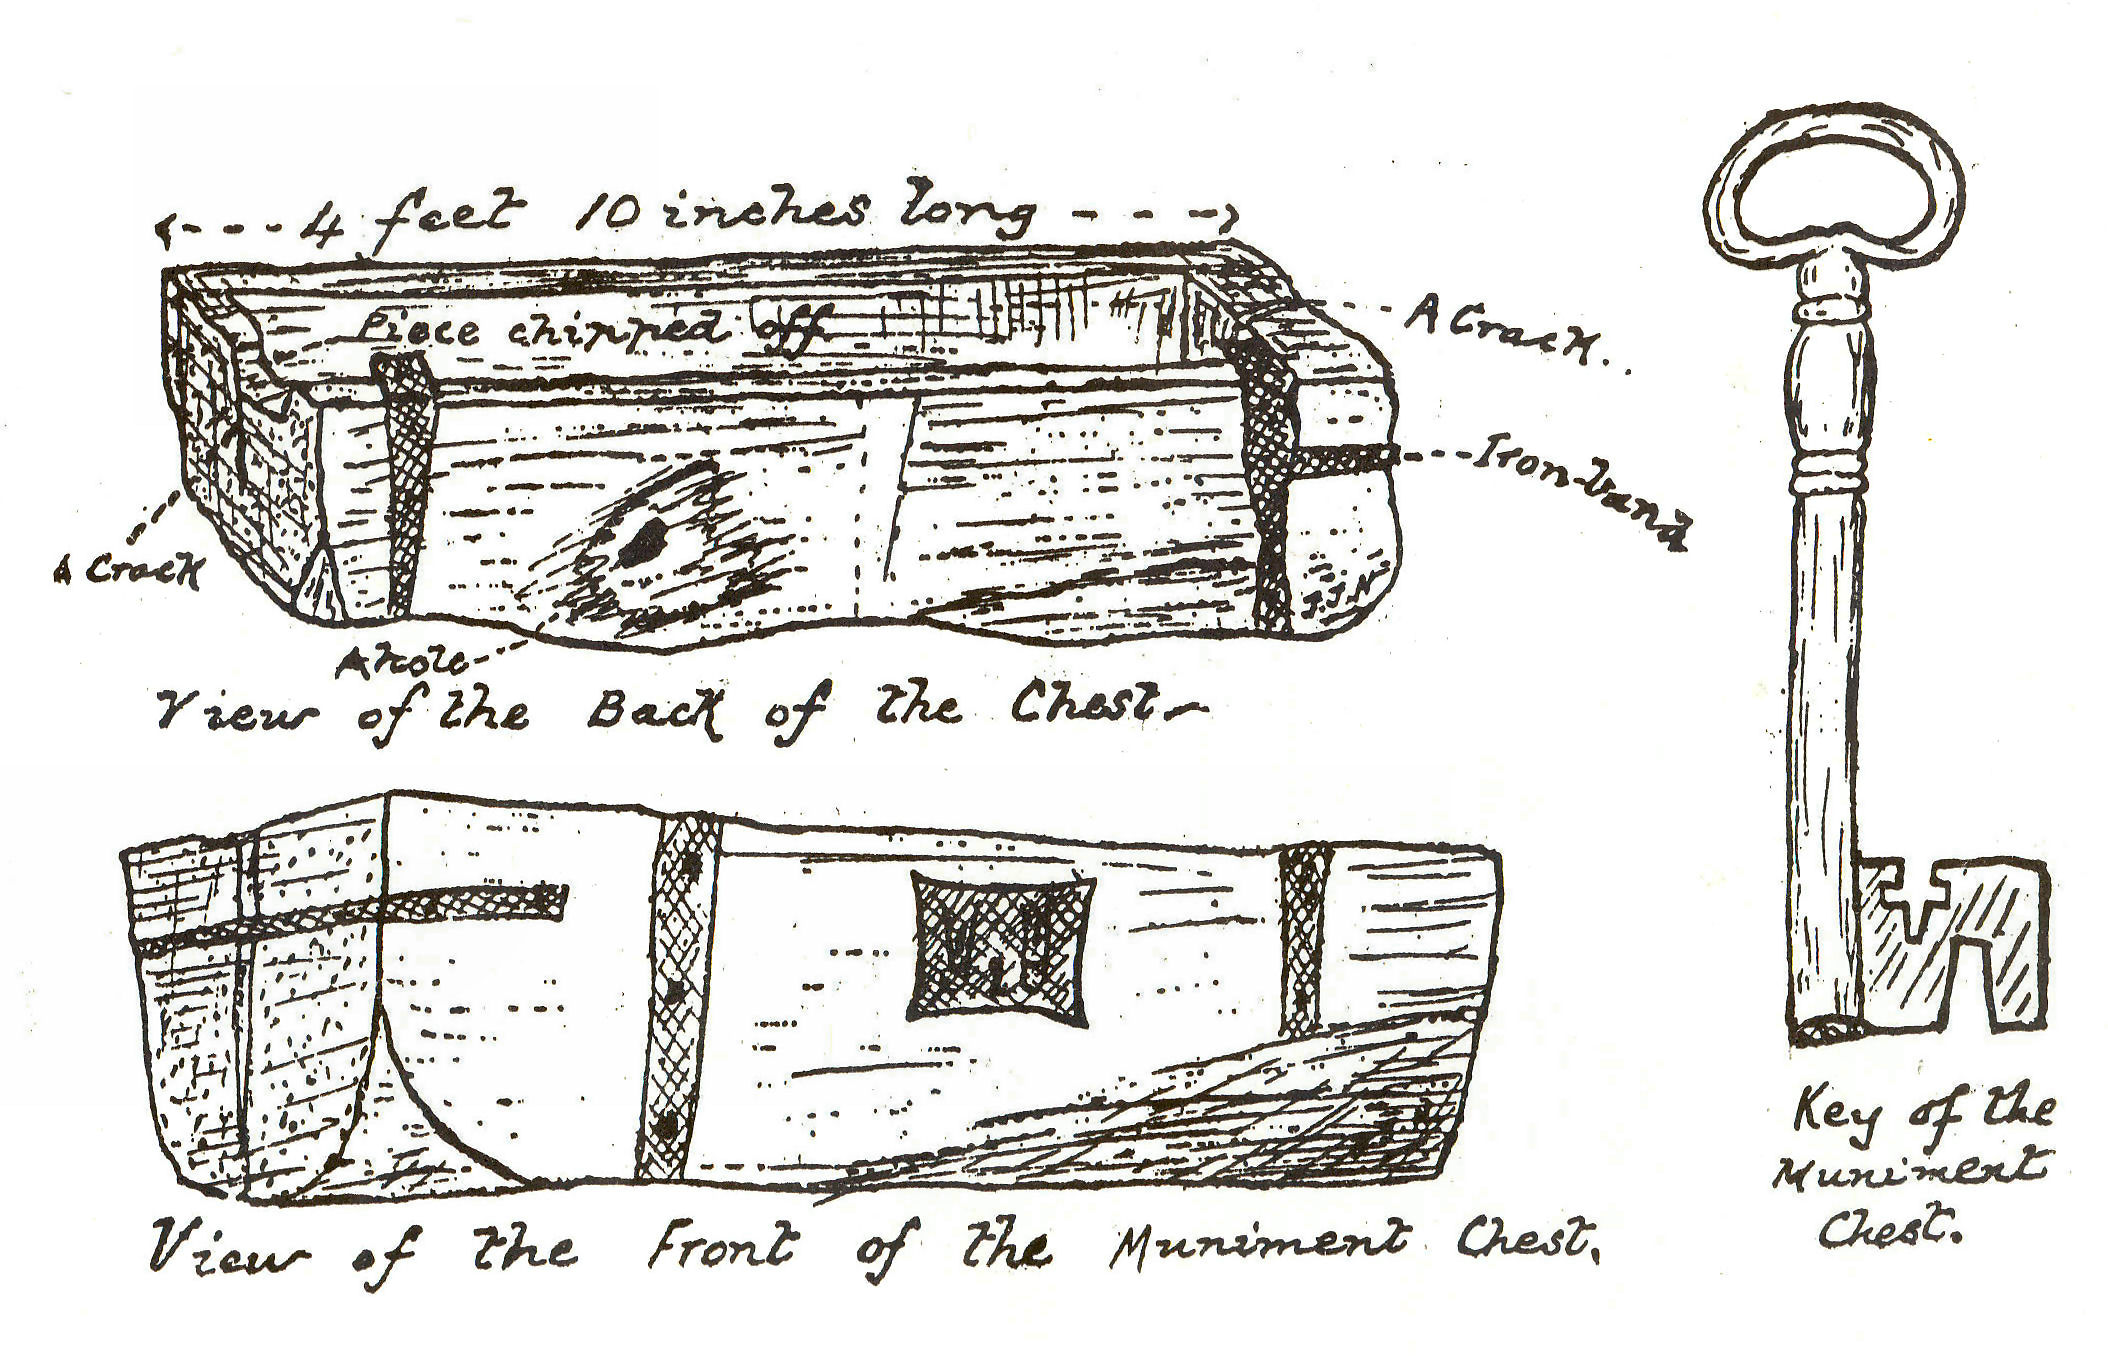 The Chest and its Key